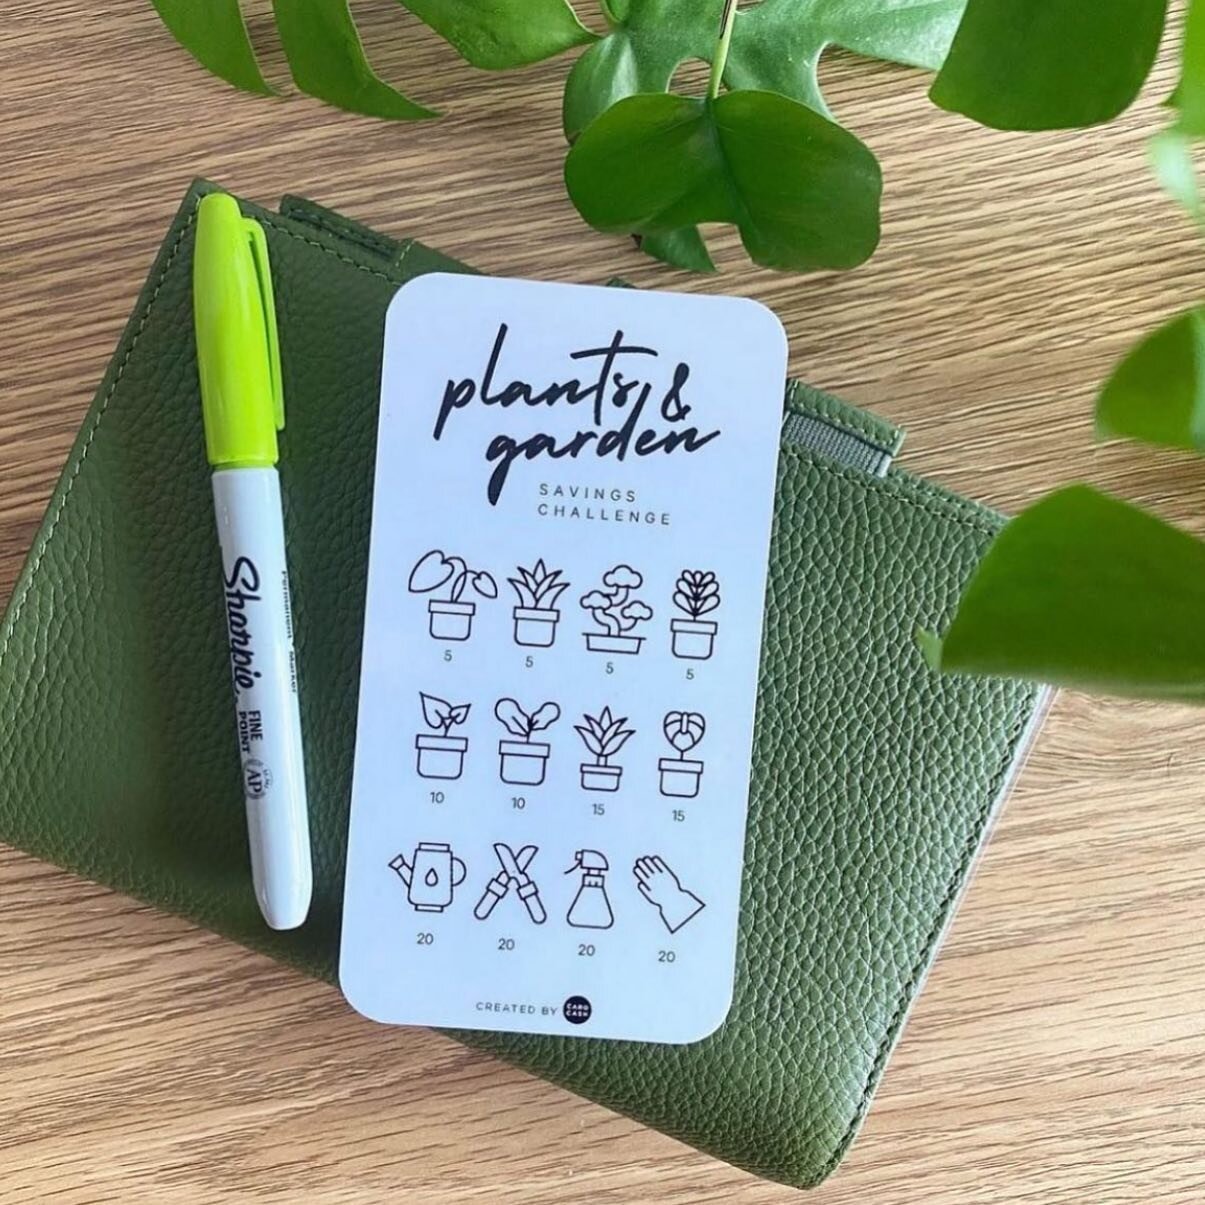 Plant lover? 
My Plants &amp; Garden savings challenge is available on my etsy store! 🪴
.
#savingschallenge #sinkingfunds #cashenvelopes #resources #budgeting #plants #indoorplants #gardening